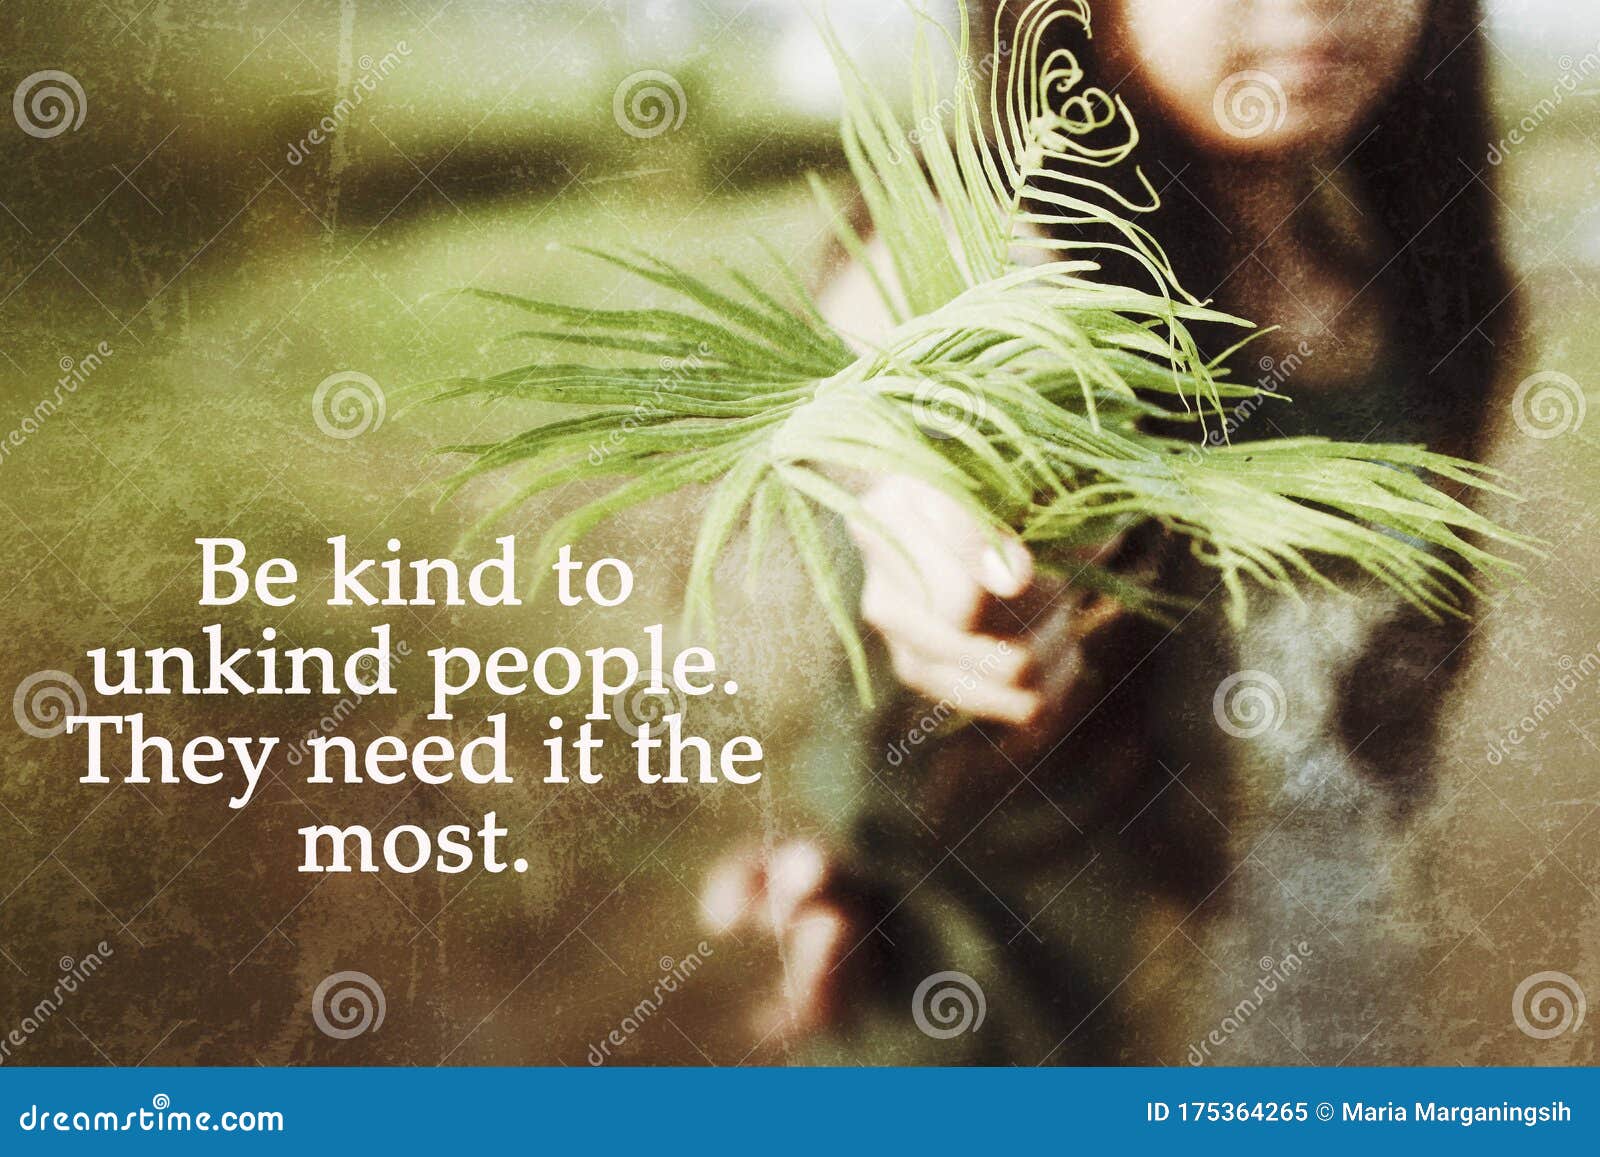 inspirational quote - be kind to unkind people. they need it the most. with young woman holding fern plant or palm leaves in hand.